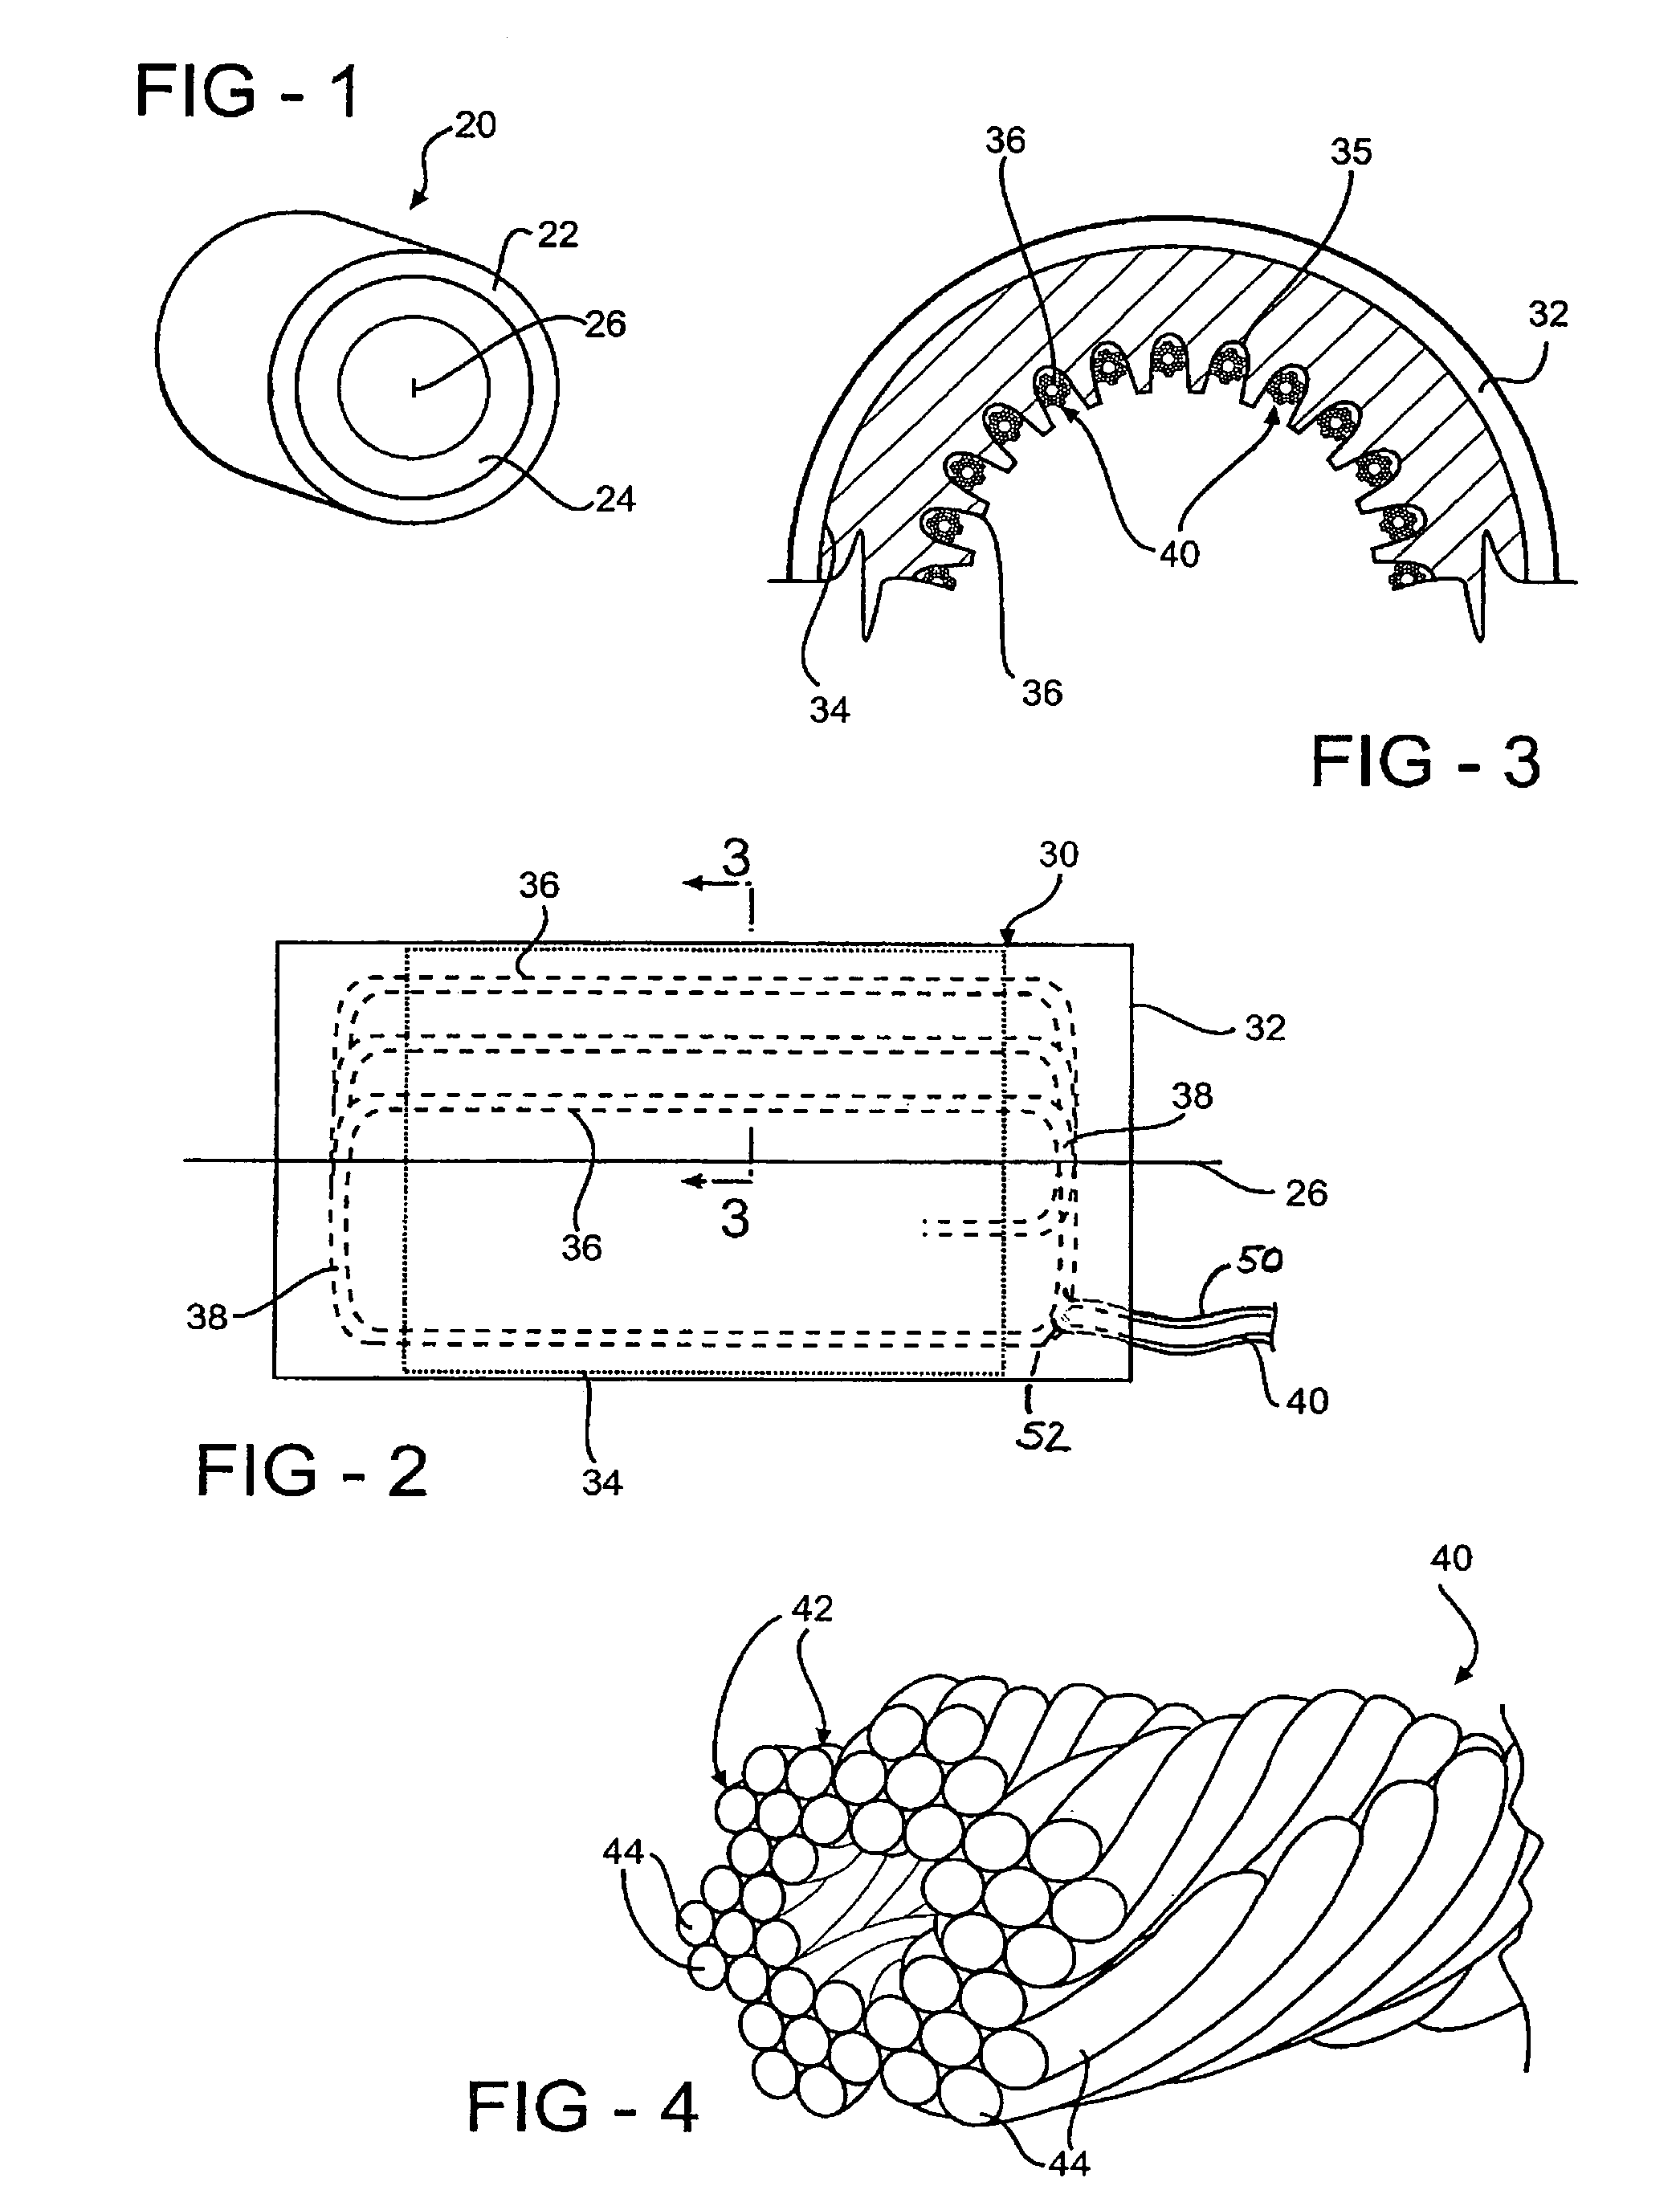 Electric motor and generator component having a plurality of windings made from a plurality of individually conductive wires